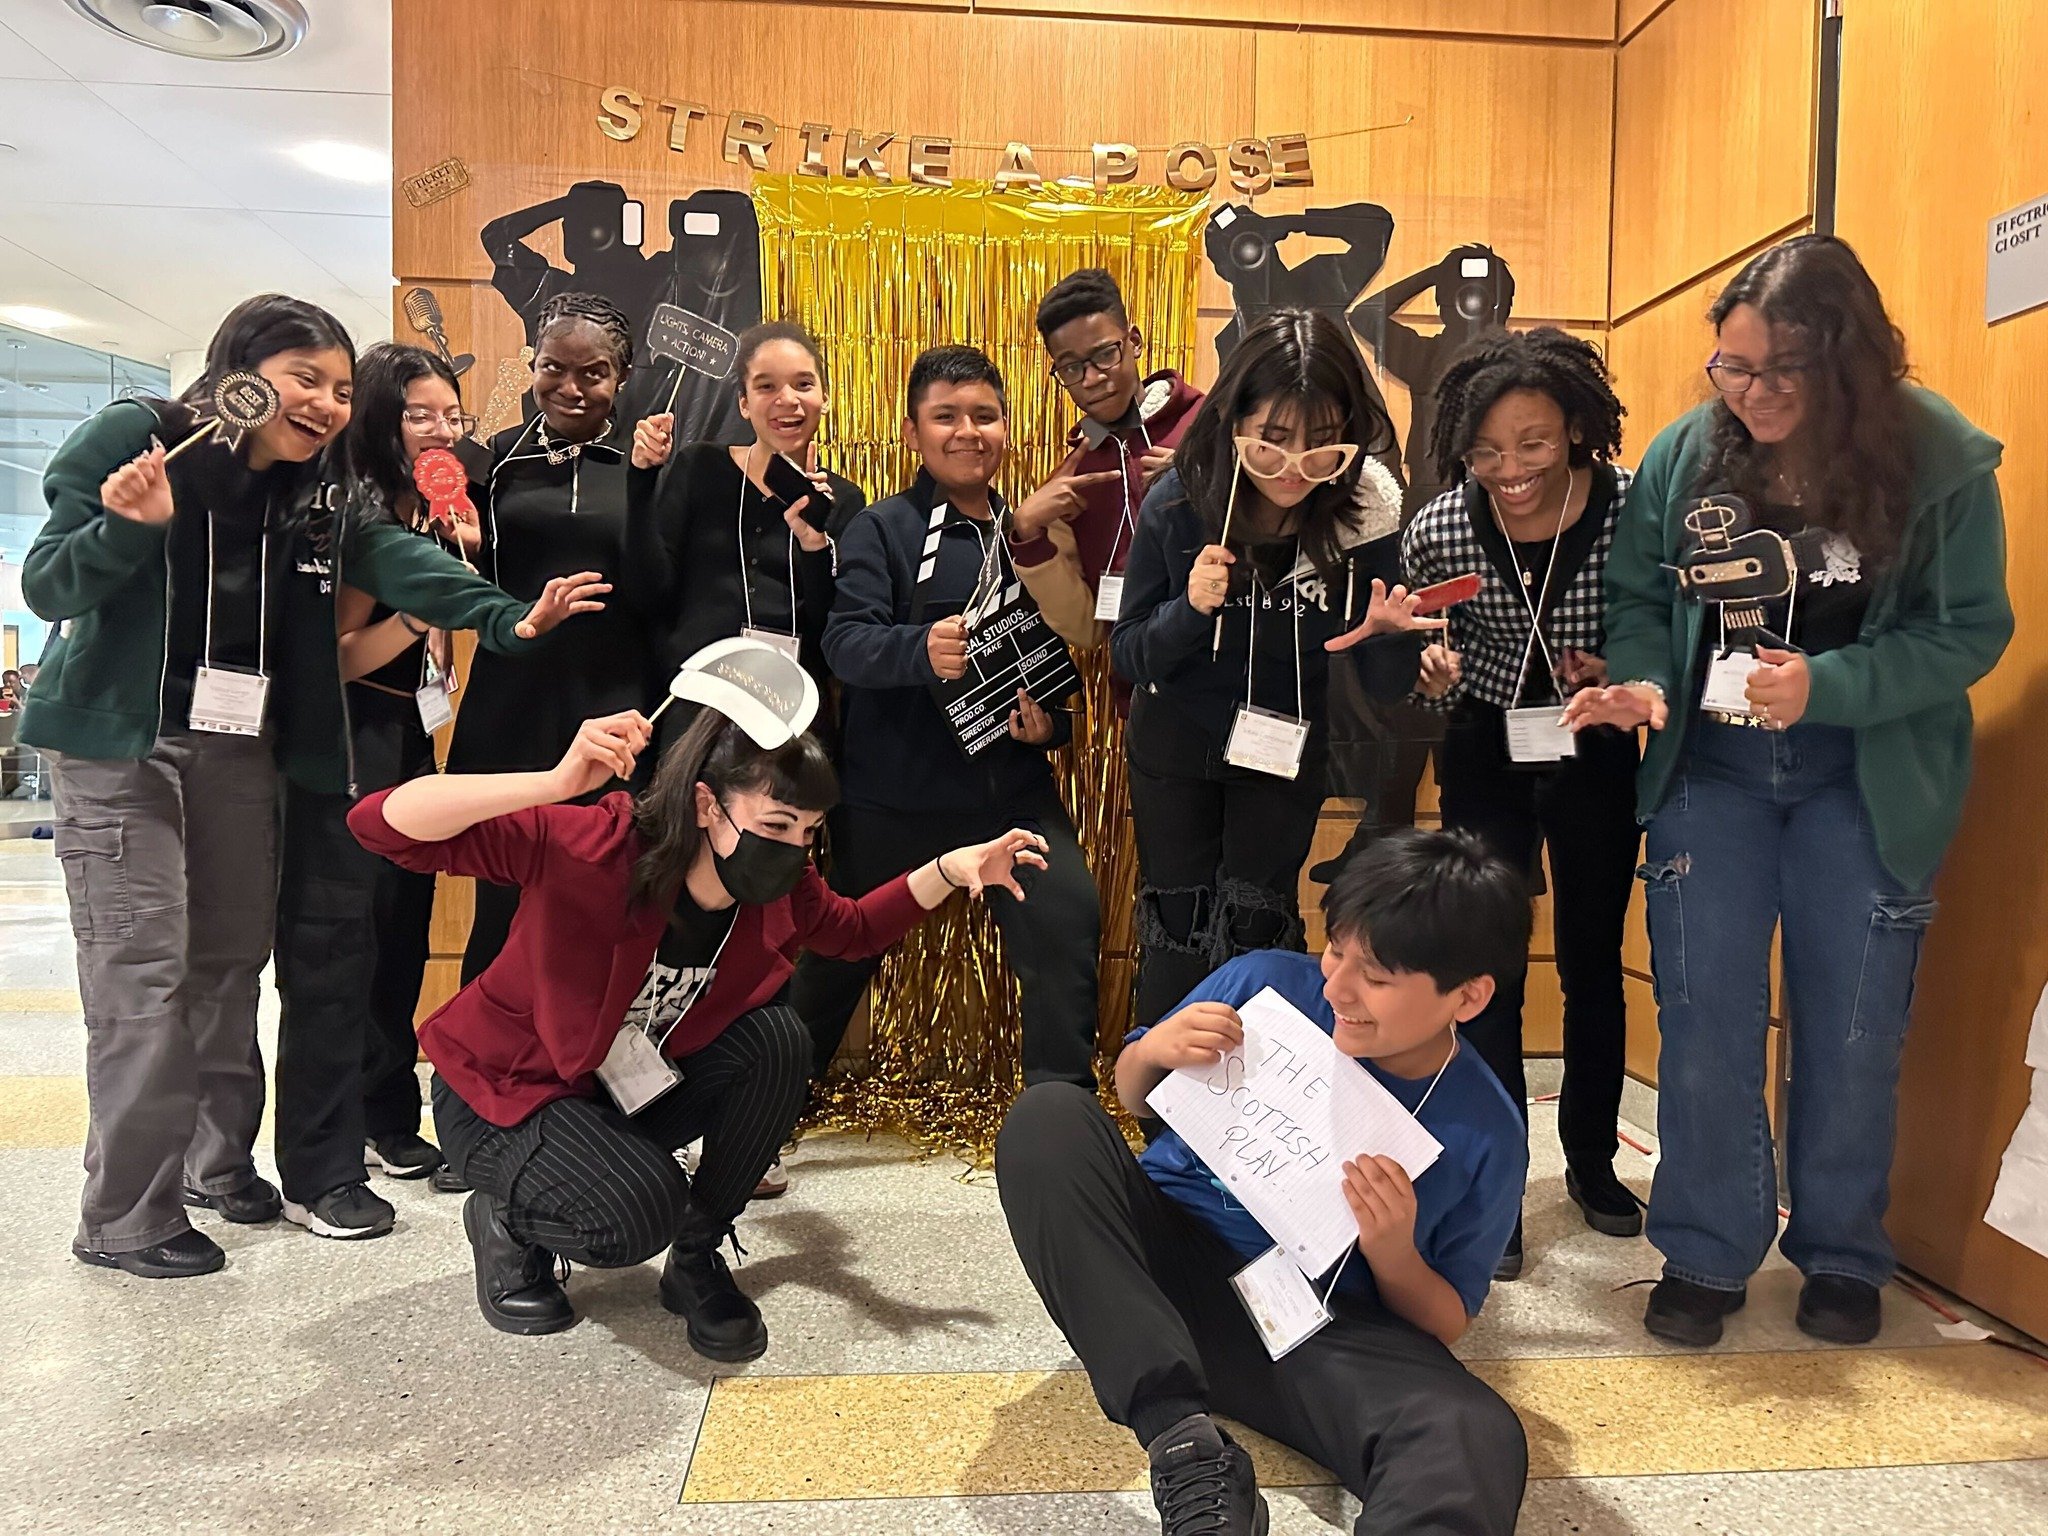 Our scholars had an AMAZING time at the NY Thespian festival! 🎭

9 scholars performed in Thespys, Charlize performed in a &ldquo;24 hour play&rdquo; and Q&amp;A, Mixie and Soleil performed an improv scene, Carlos and Mixie won the event scavenger hu